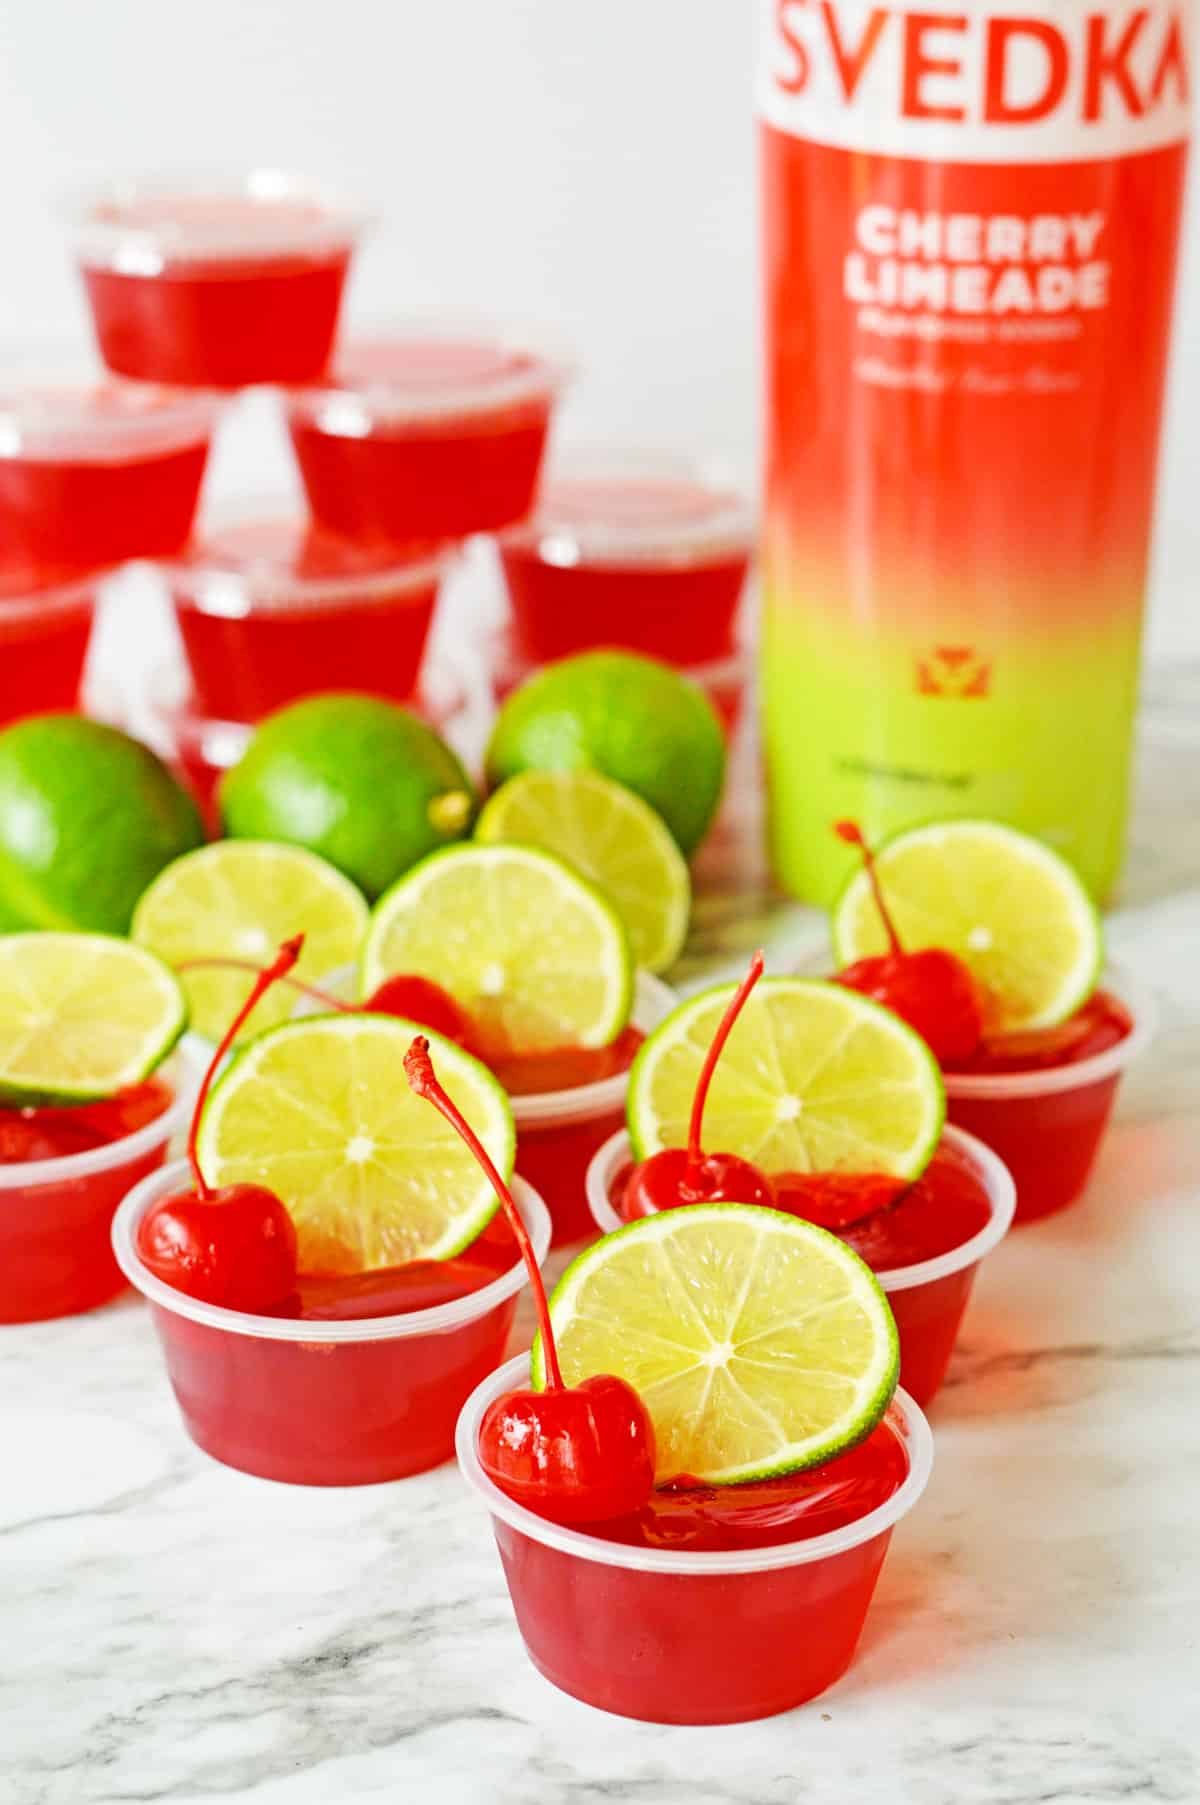 Cherry Limeade Jello Shots made with red jello and garnished with lime and maraschino cherries. Fresh limes, shots covered with lids, and a bottle of SVEDKA cherry limeade vodka are in the background.